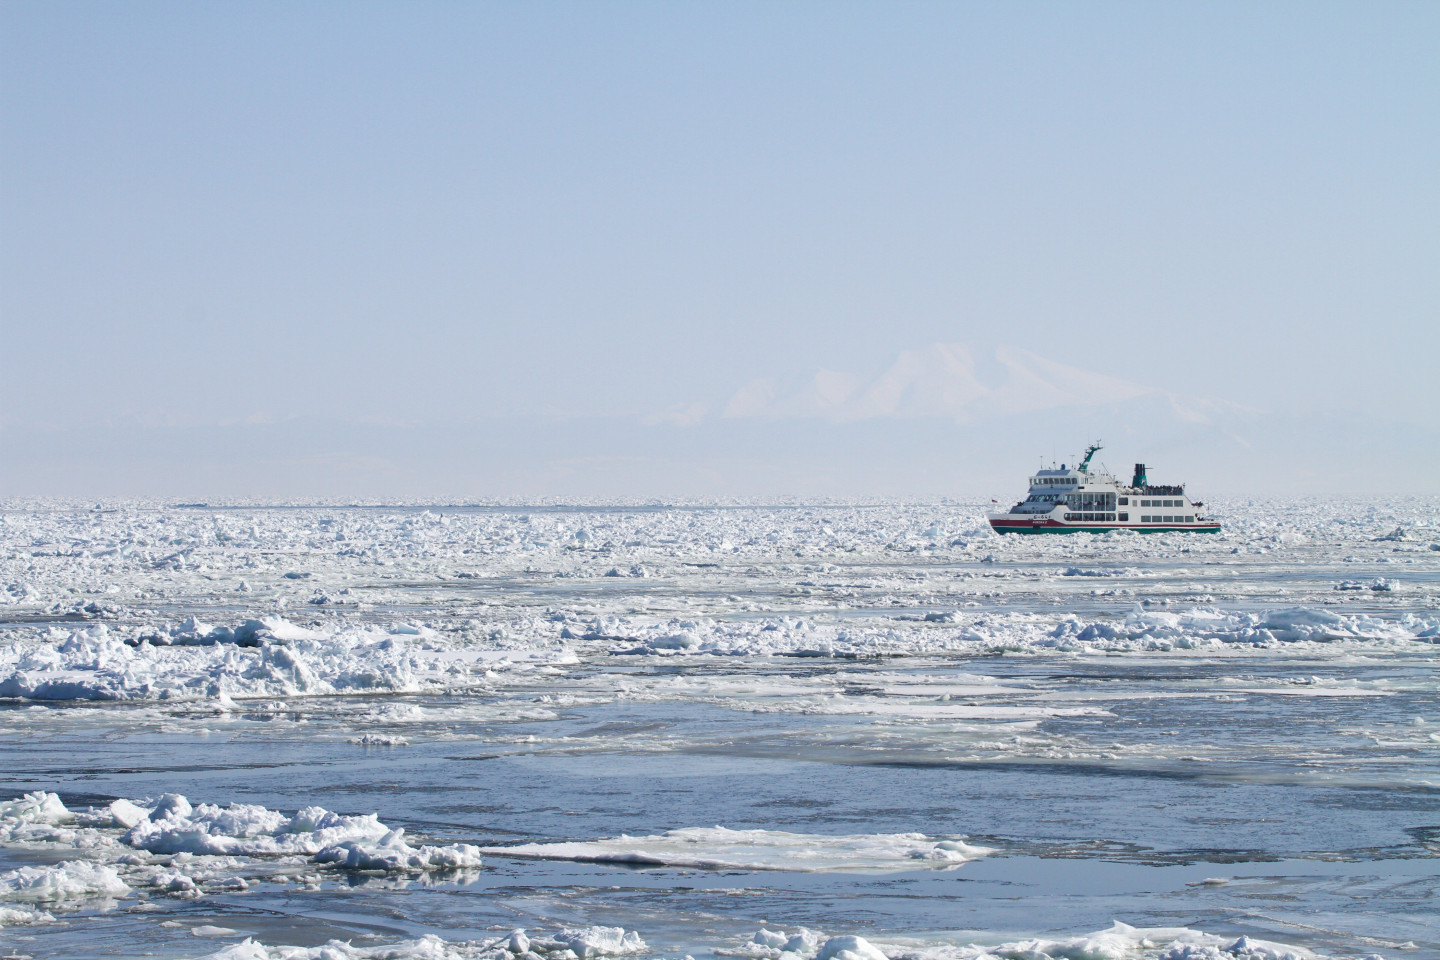 How do you enjoy ice? By taking an ice floe walk from an ice sightseeing boat!